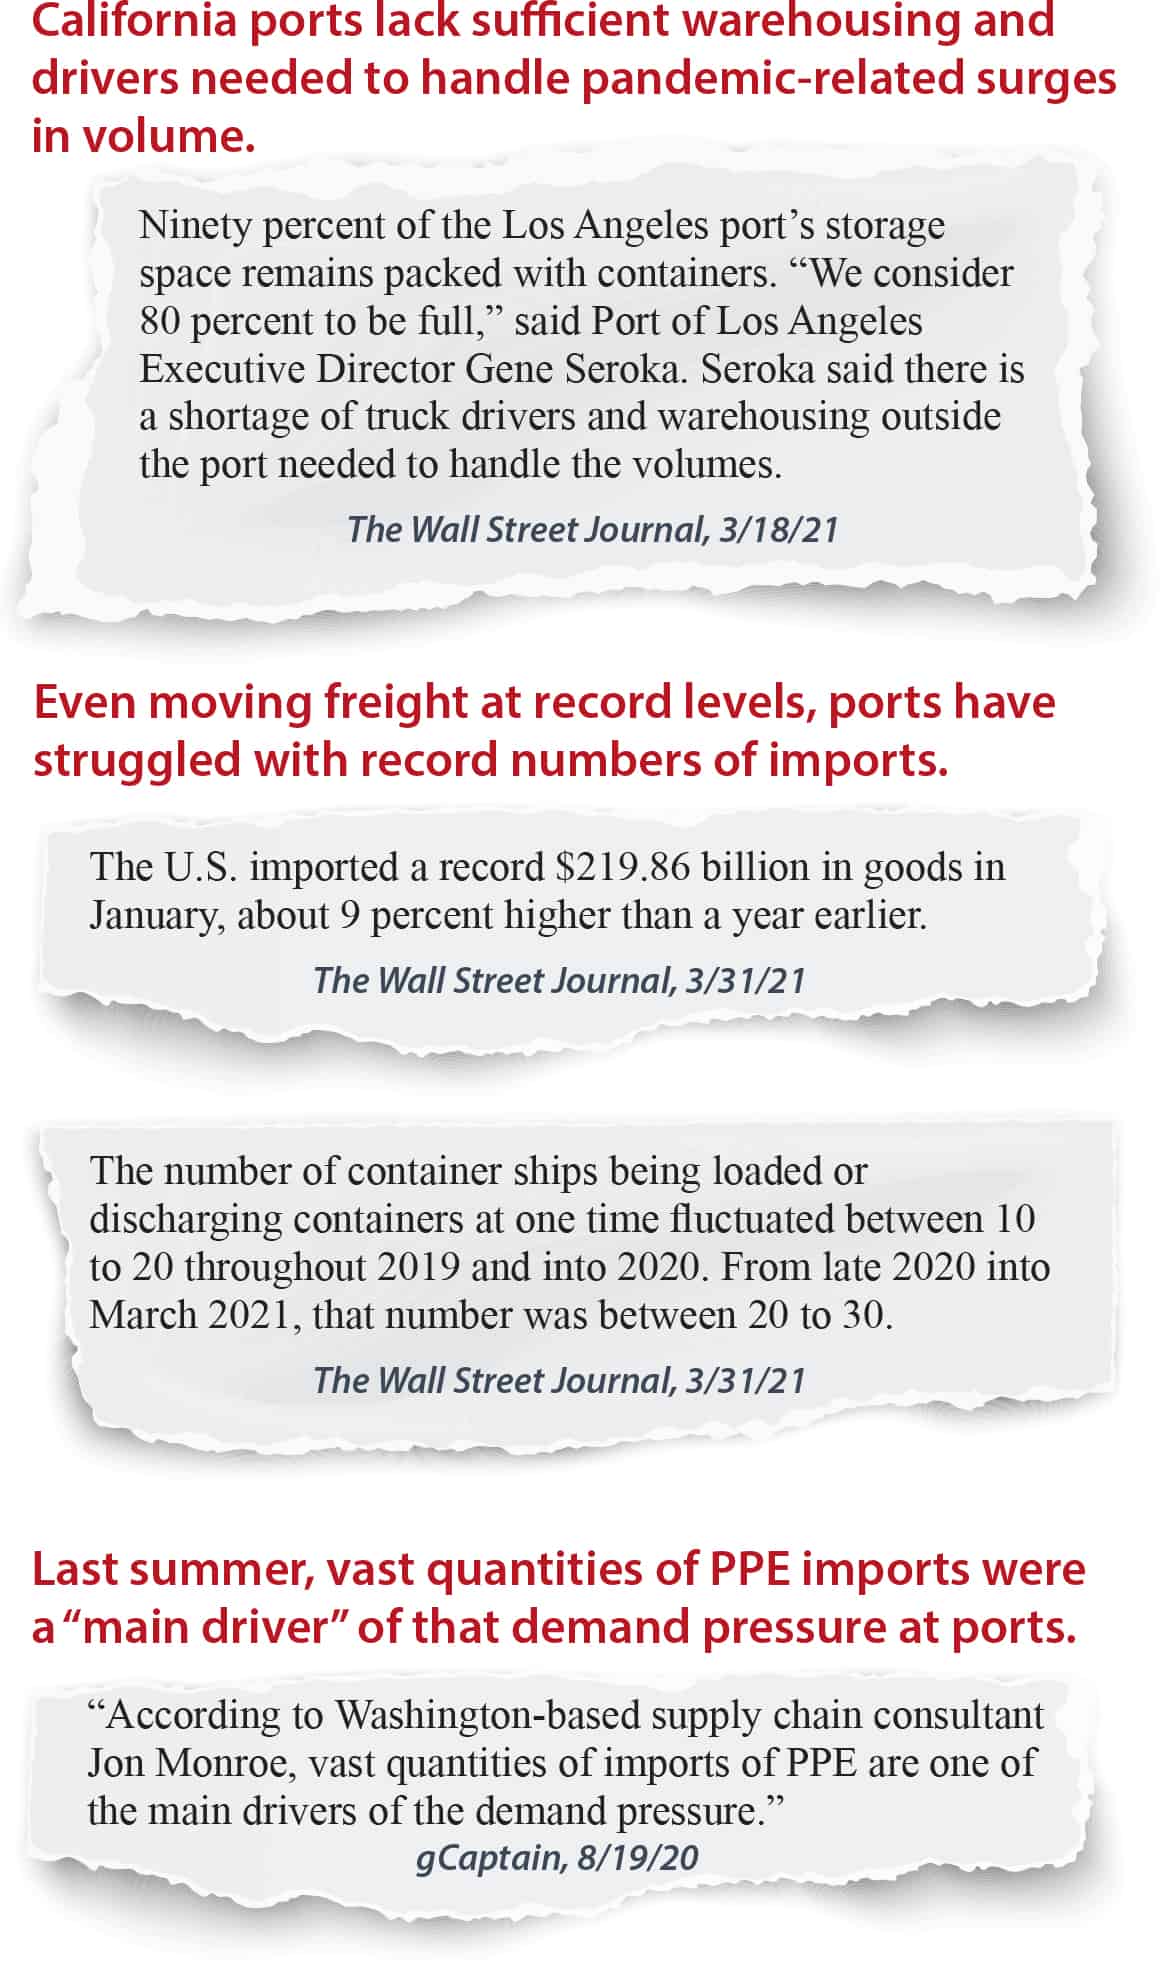 Quotes from the Wall Street Journal and gCaptain. Please enable images to view.